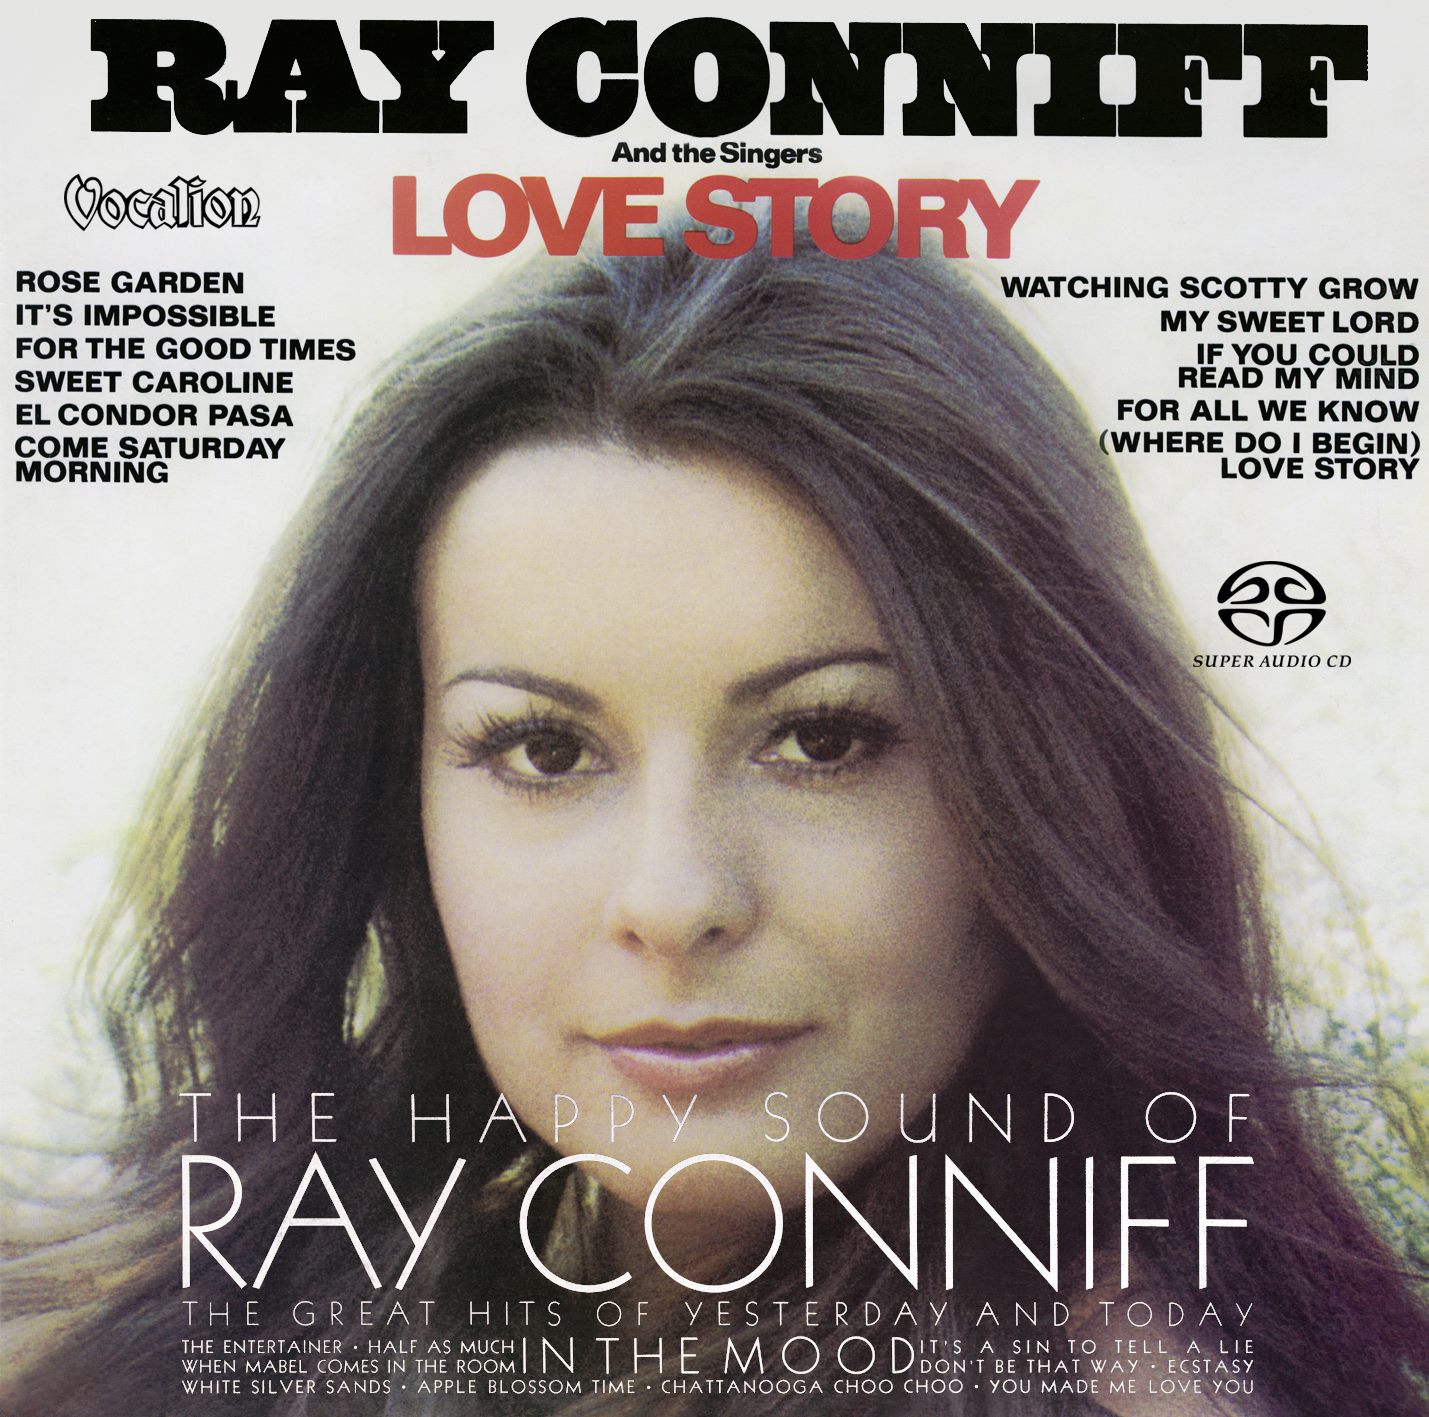 Ray Conniff – The Happy Sound Of & Love Story (1974 & 1971) [Reissue 2019] MCH SACD ISO + FLAC 24bit/96kHz